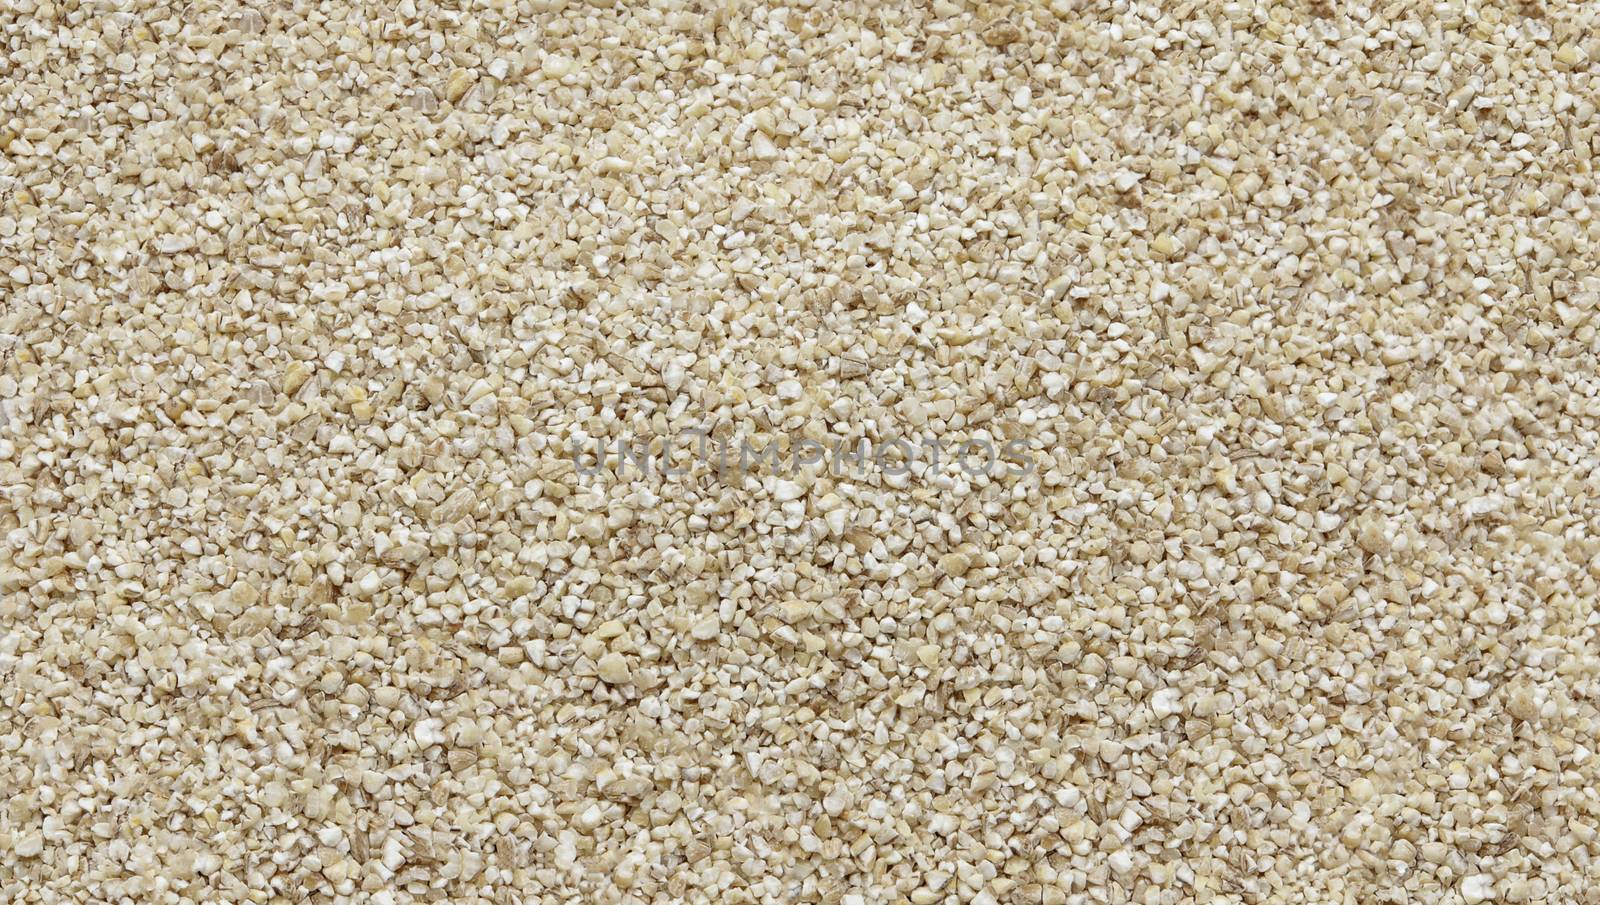 Raw crashed barley -texture and details - traditional food, top view